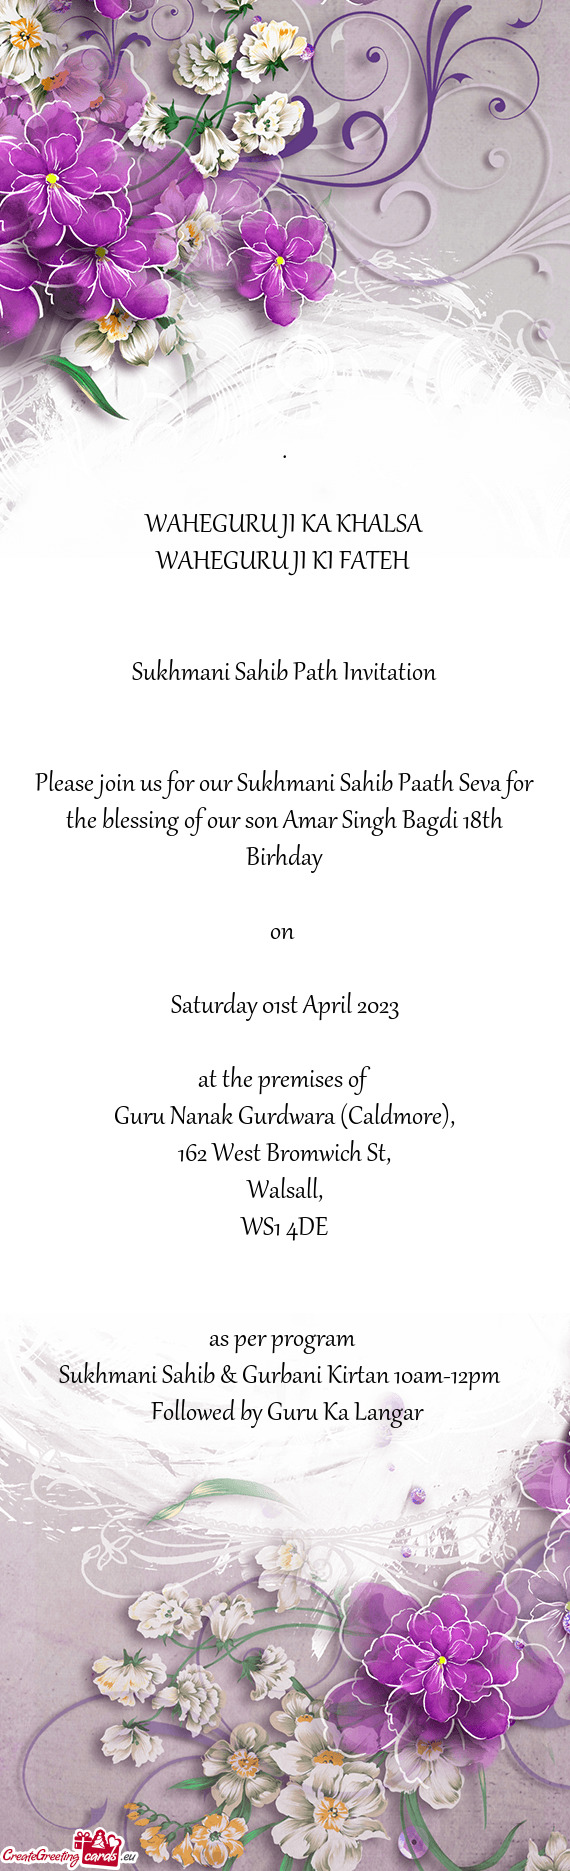 Please join us for our Sukhmani Sahib Paath Seva for the blessing of our son Amar Singh Bagdi 18th B